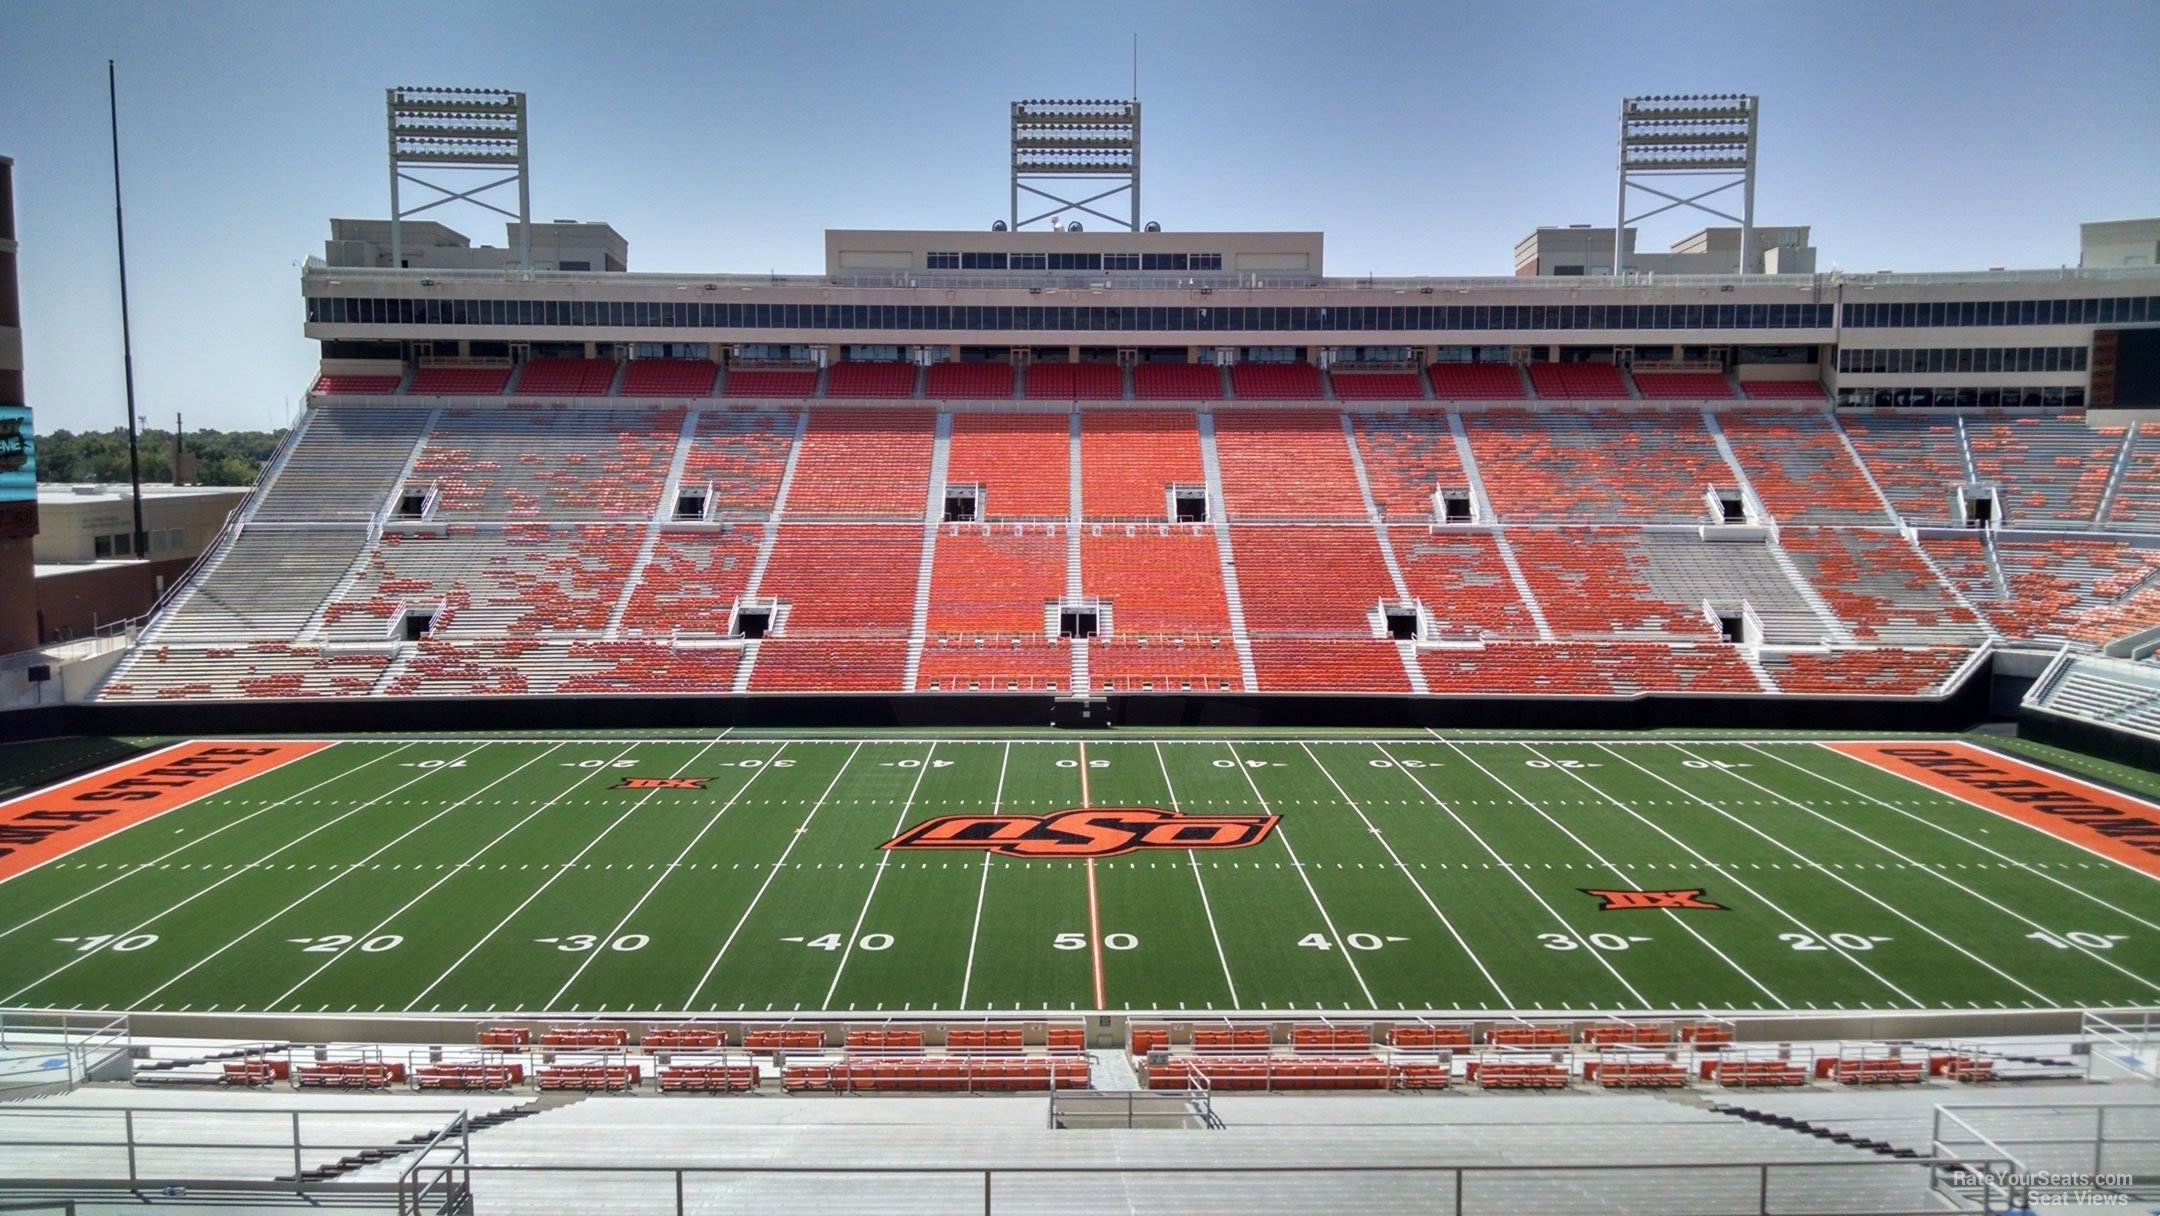 section 331, row 19 seat view  - boone pickens stadium